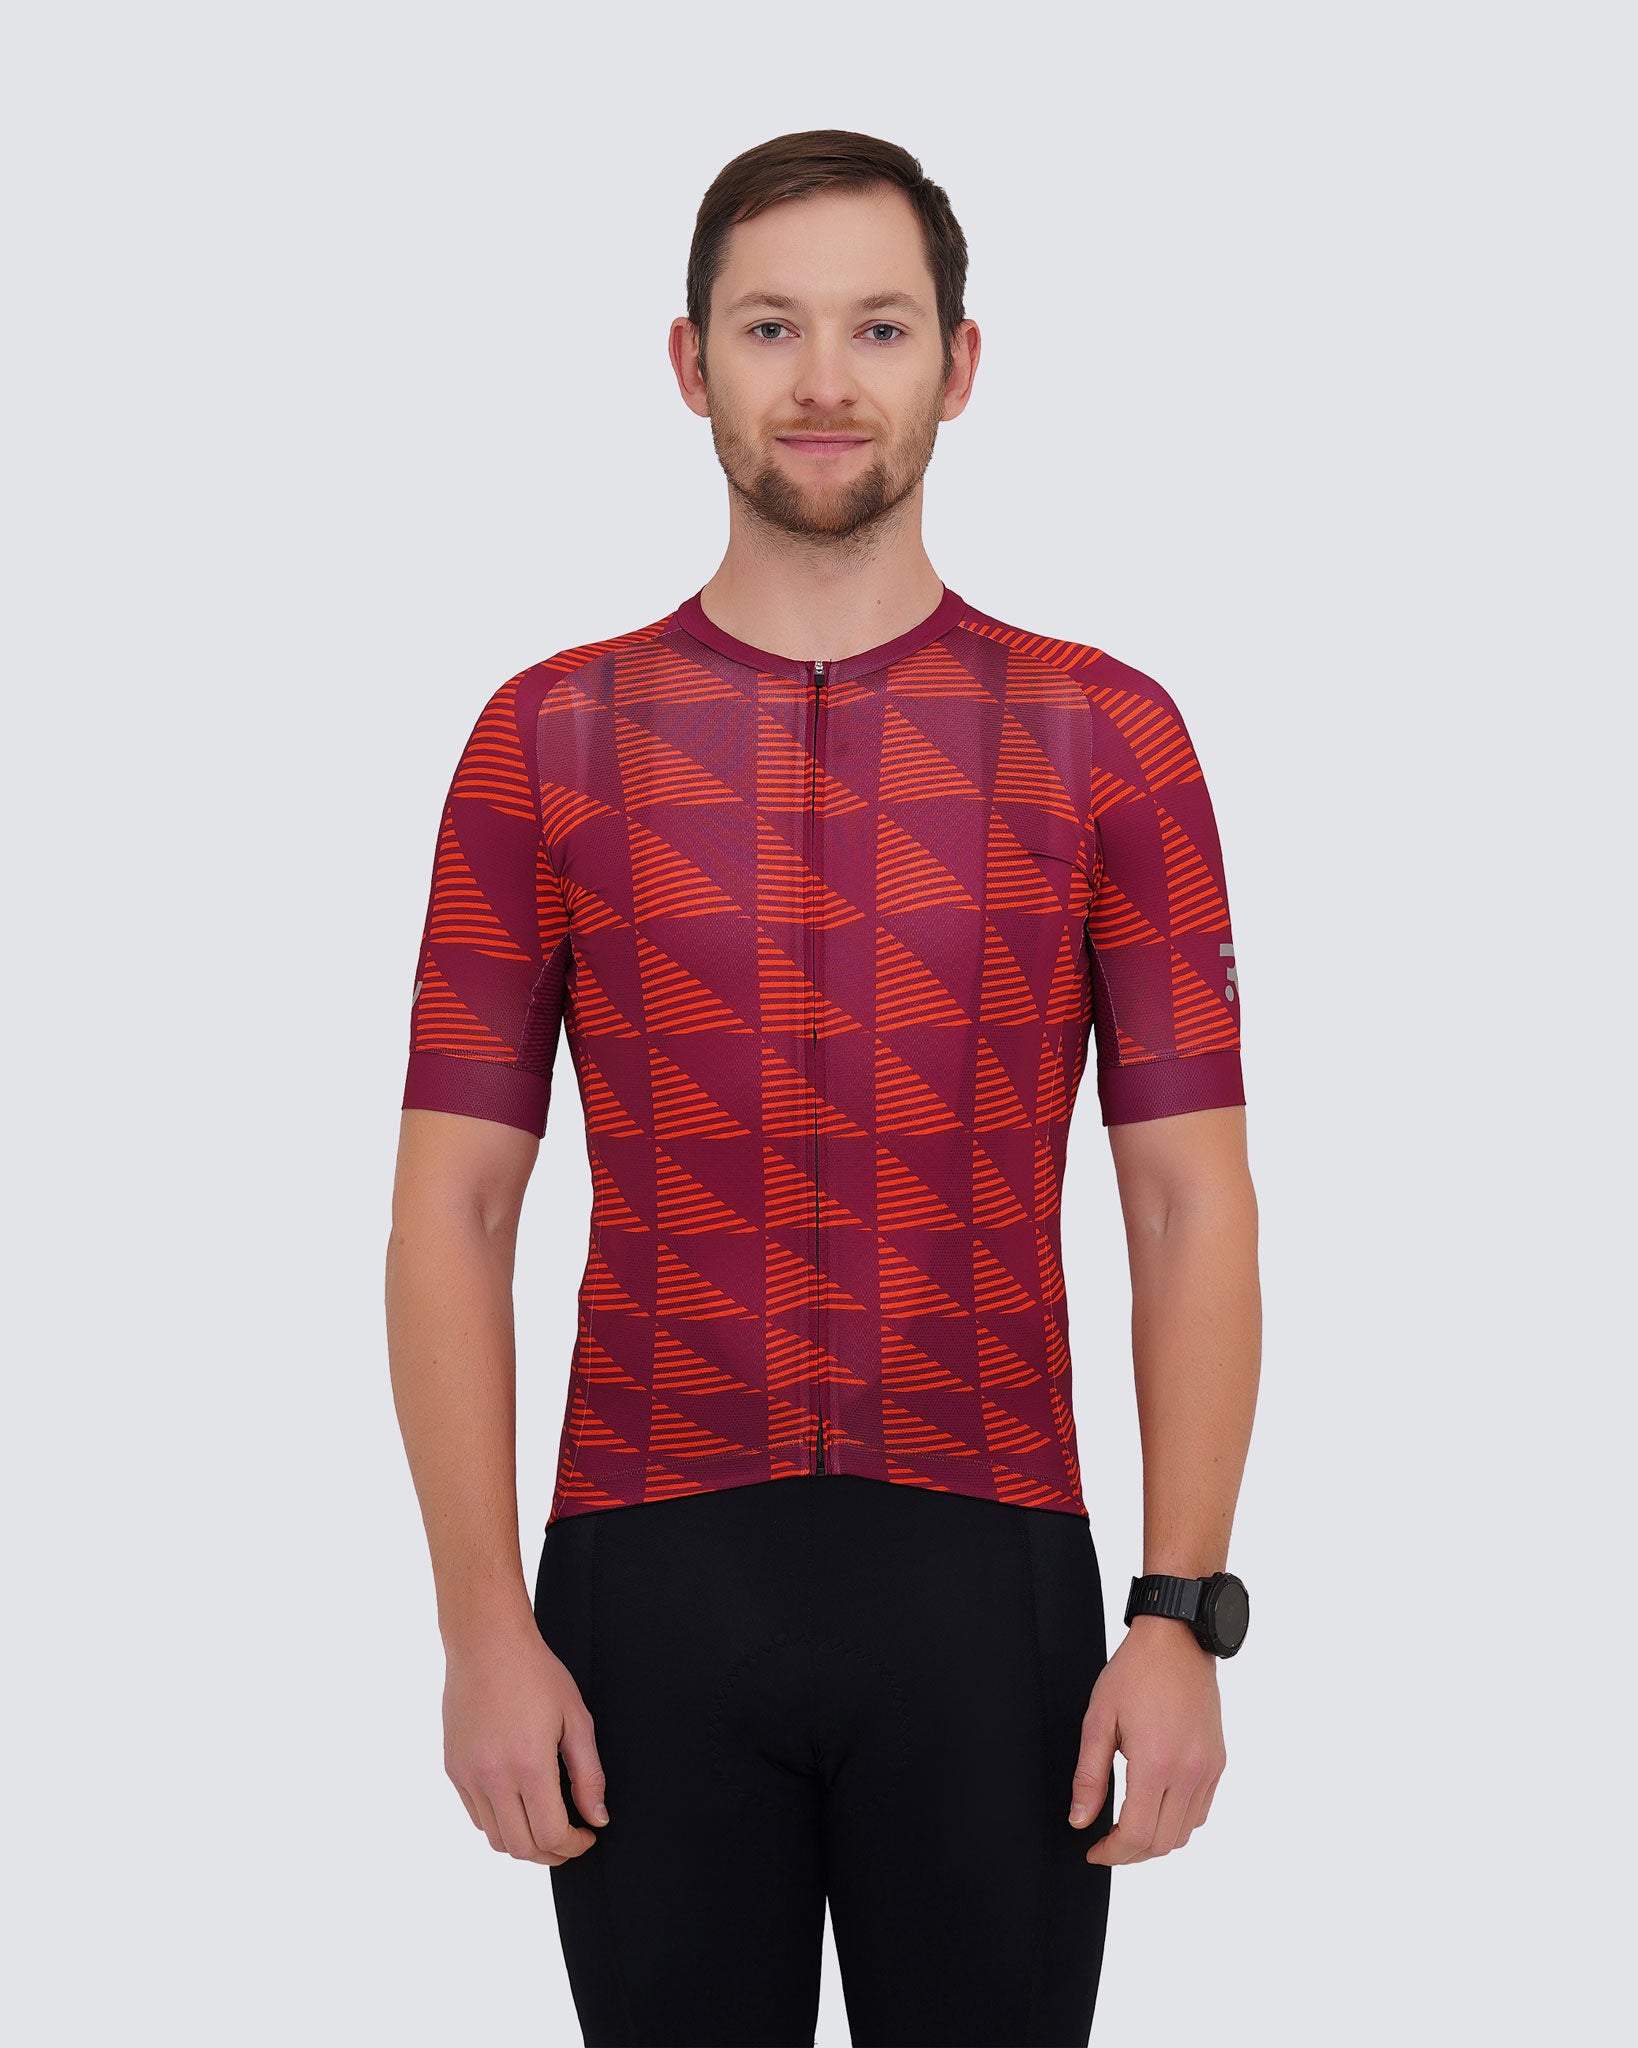 front view of red jersey for men with diamond pattern